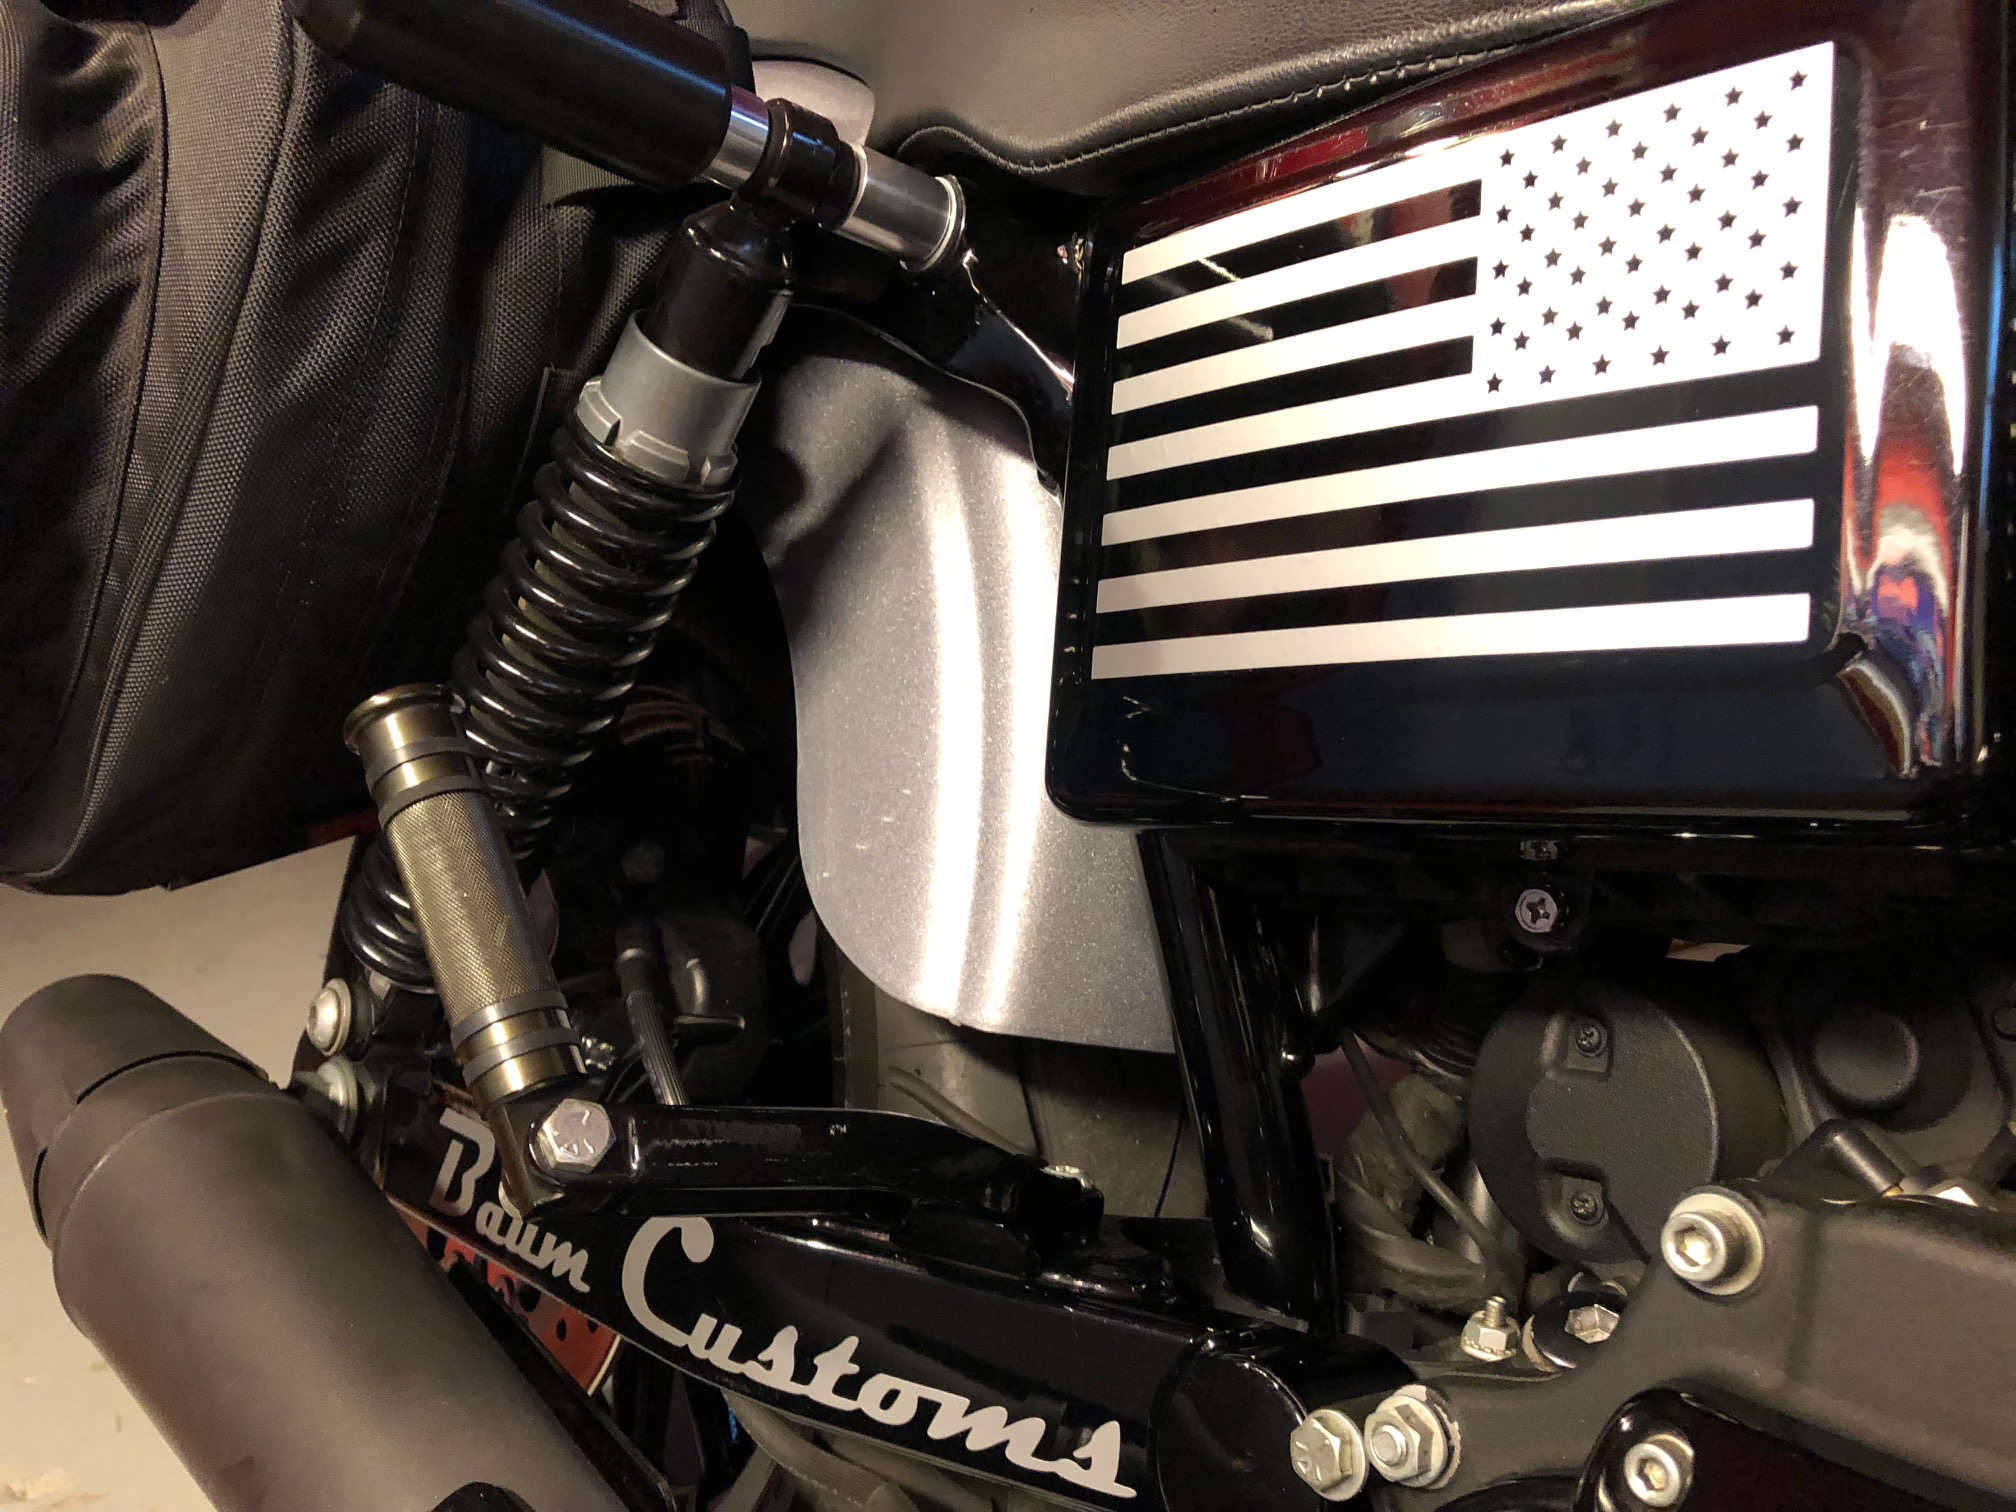 dyna low rider battery cover